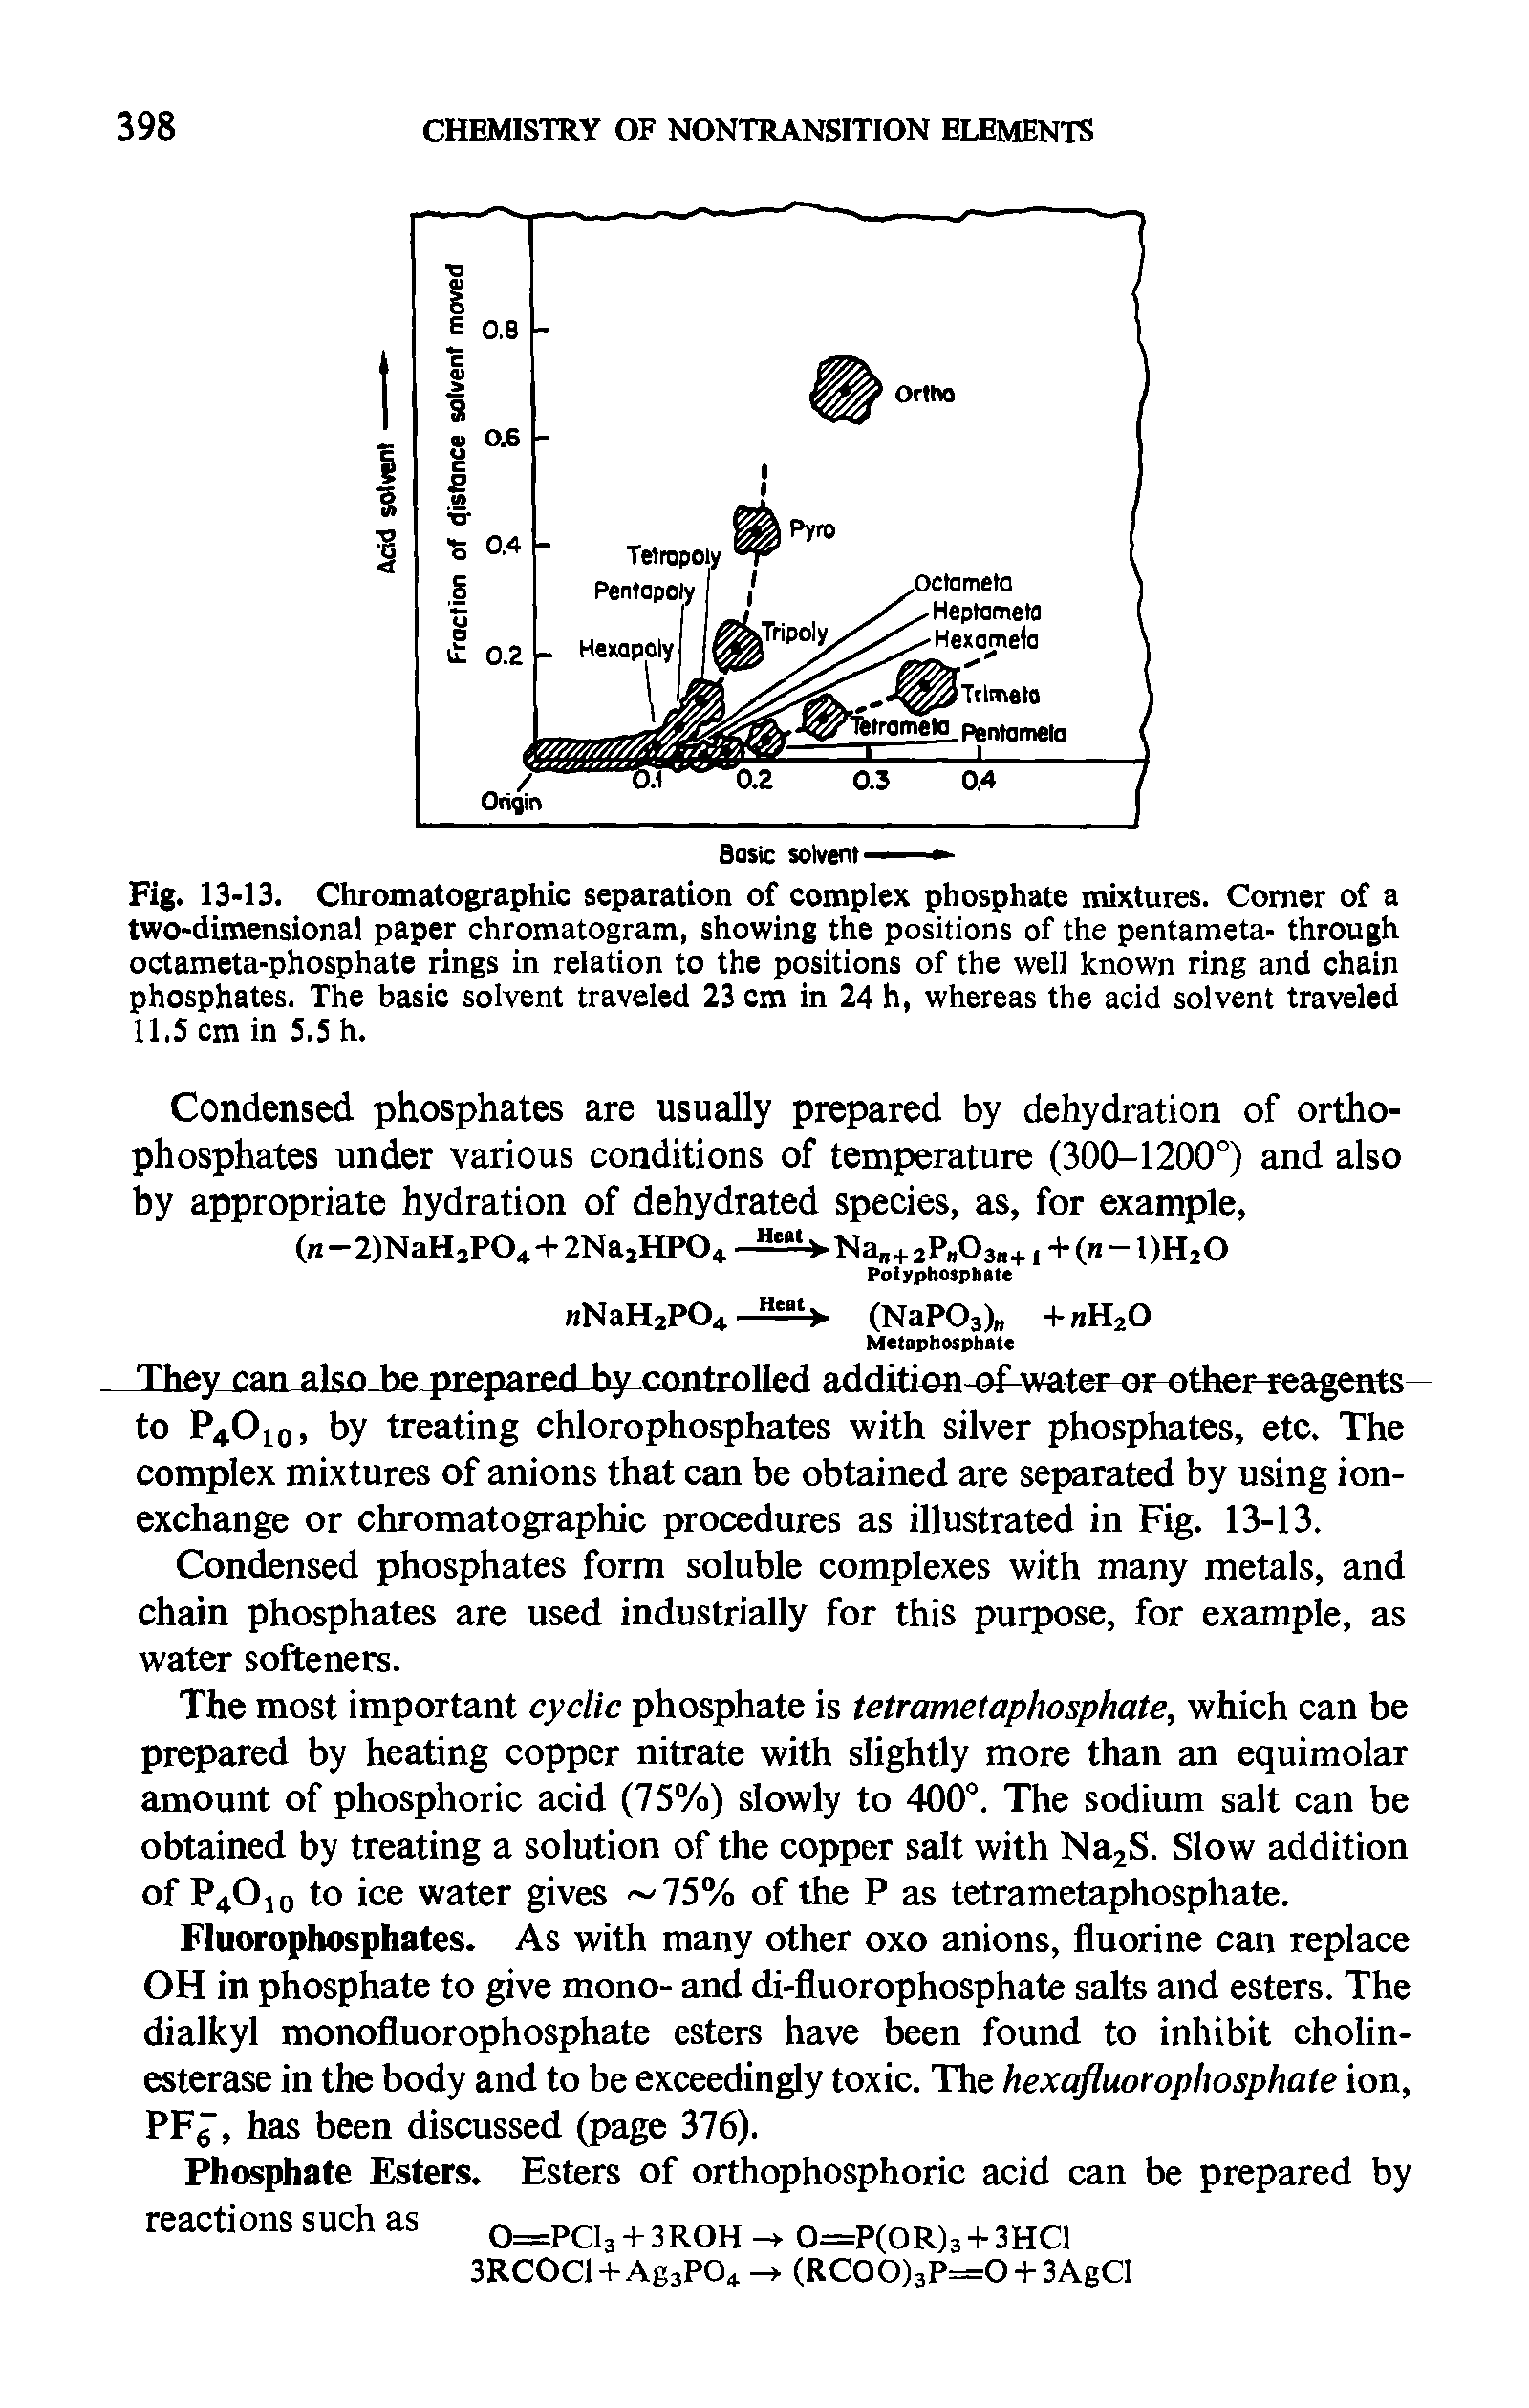 Fig. 13-13. Chromatographic separation of complex phosphate mixtures. Comer of a two-dimensional paper chromatogram, showing the positions of the pentameta- through octameta-phosphate rings in relation to the positions of the well known ring and chain phosphates. The basic solvent traveled 23 cm in 24 h, whereas the acid solvent traveled 11.5 cm in 5.5 h.